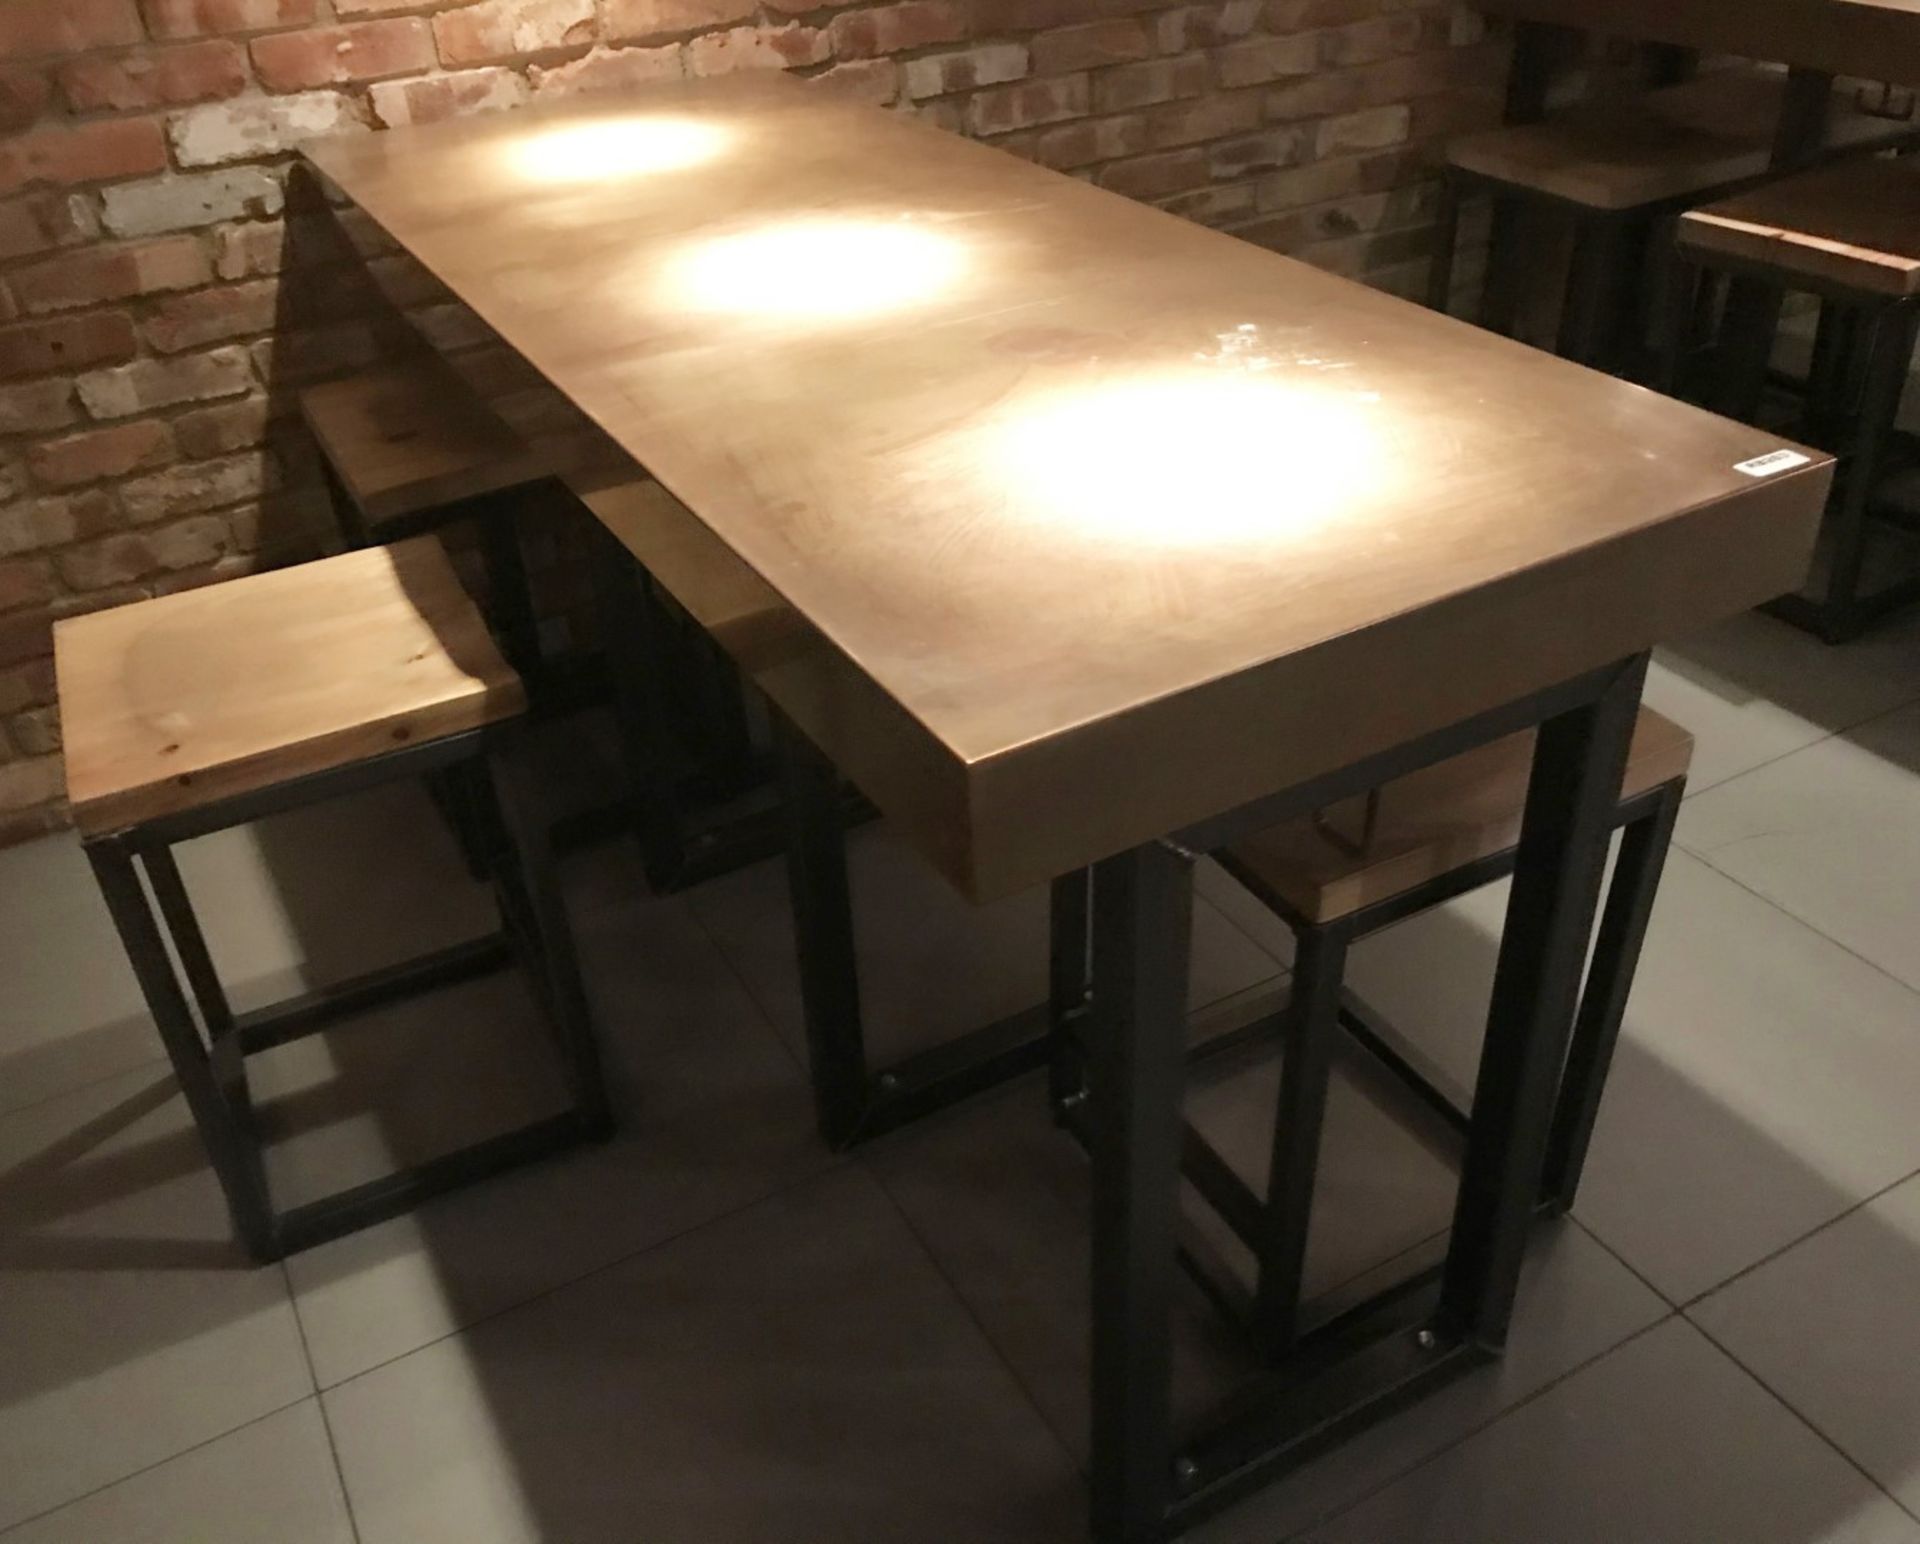 1 x Restaurant Dining Table With Industrial Metal Base and Copper Top - Size H91 x W180 x D70 cms - - Image 5 of 7